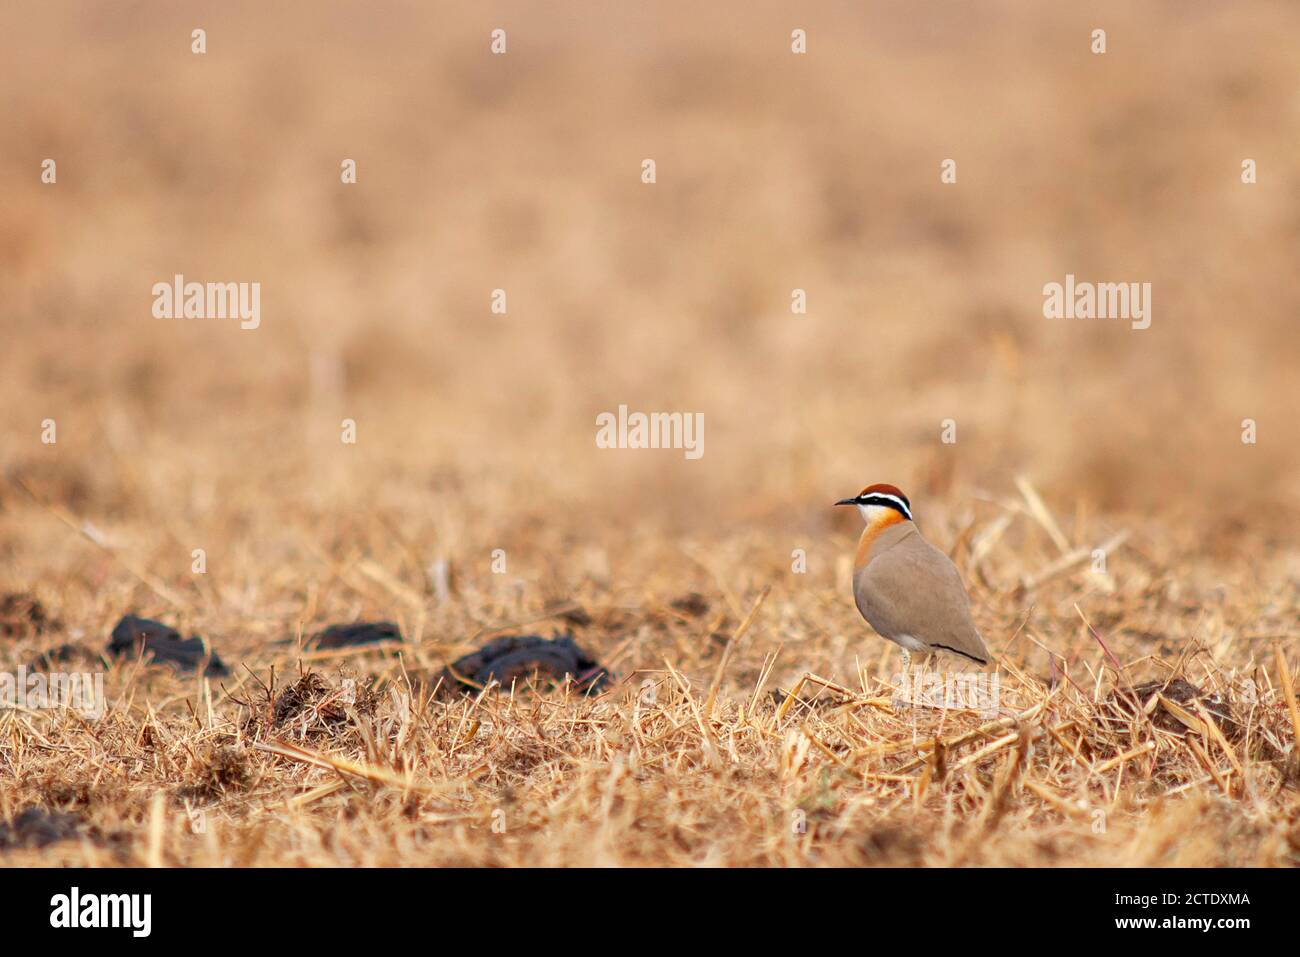 Indian courser (Cursorius coromandelicus), adult standing in a barren arid field with serveral cowpats, India Stock Photo